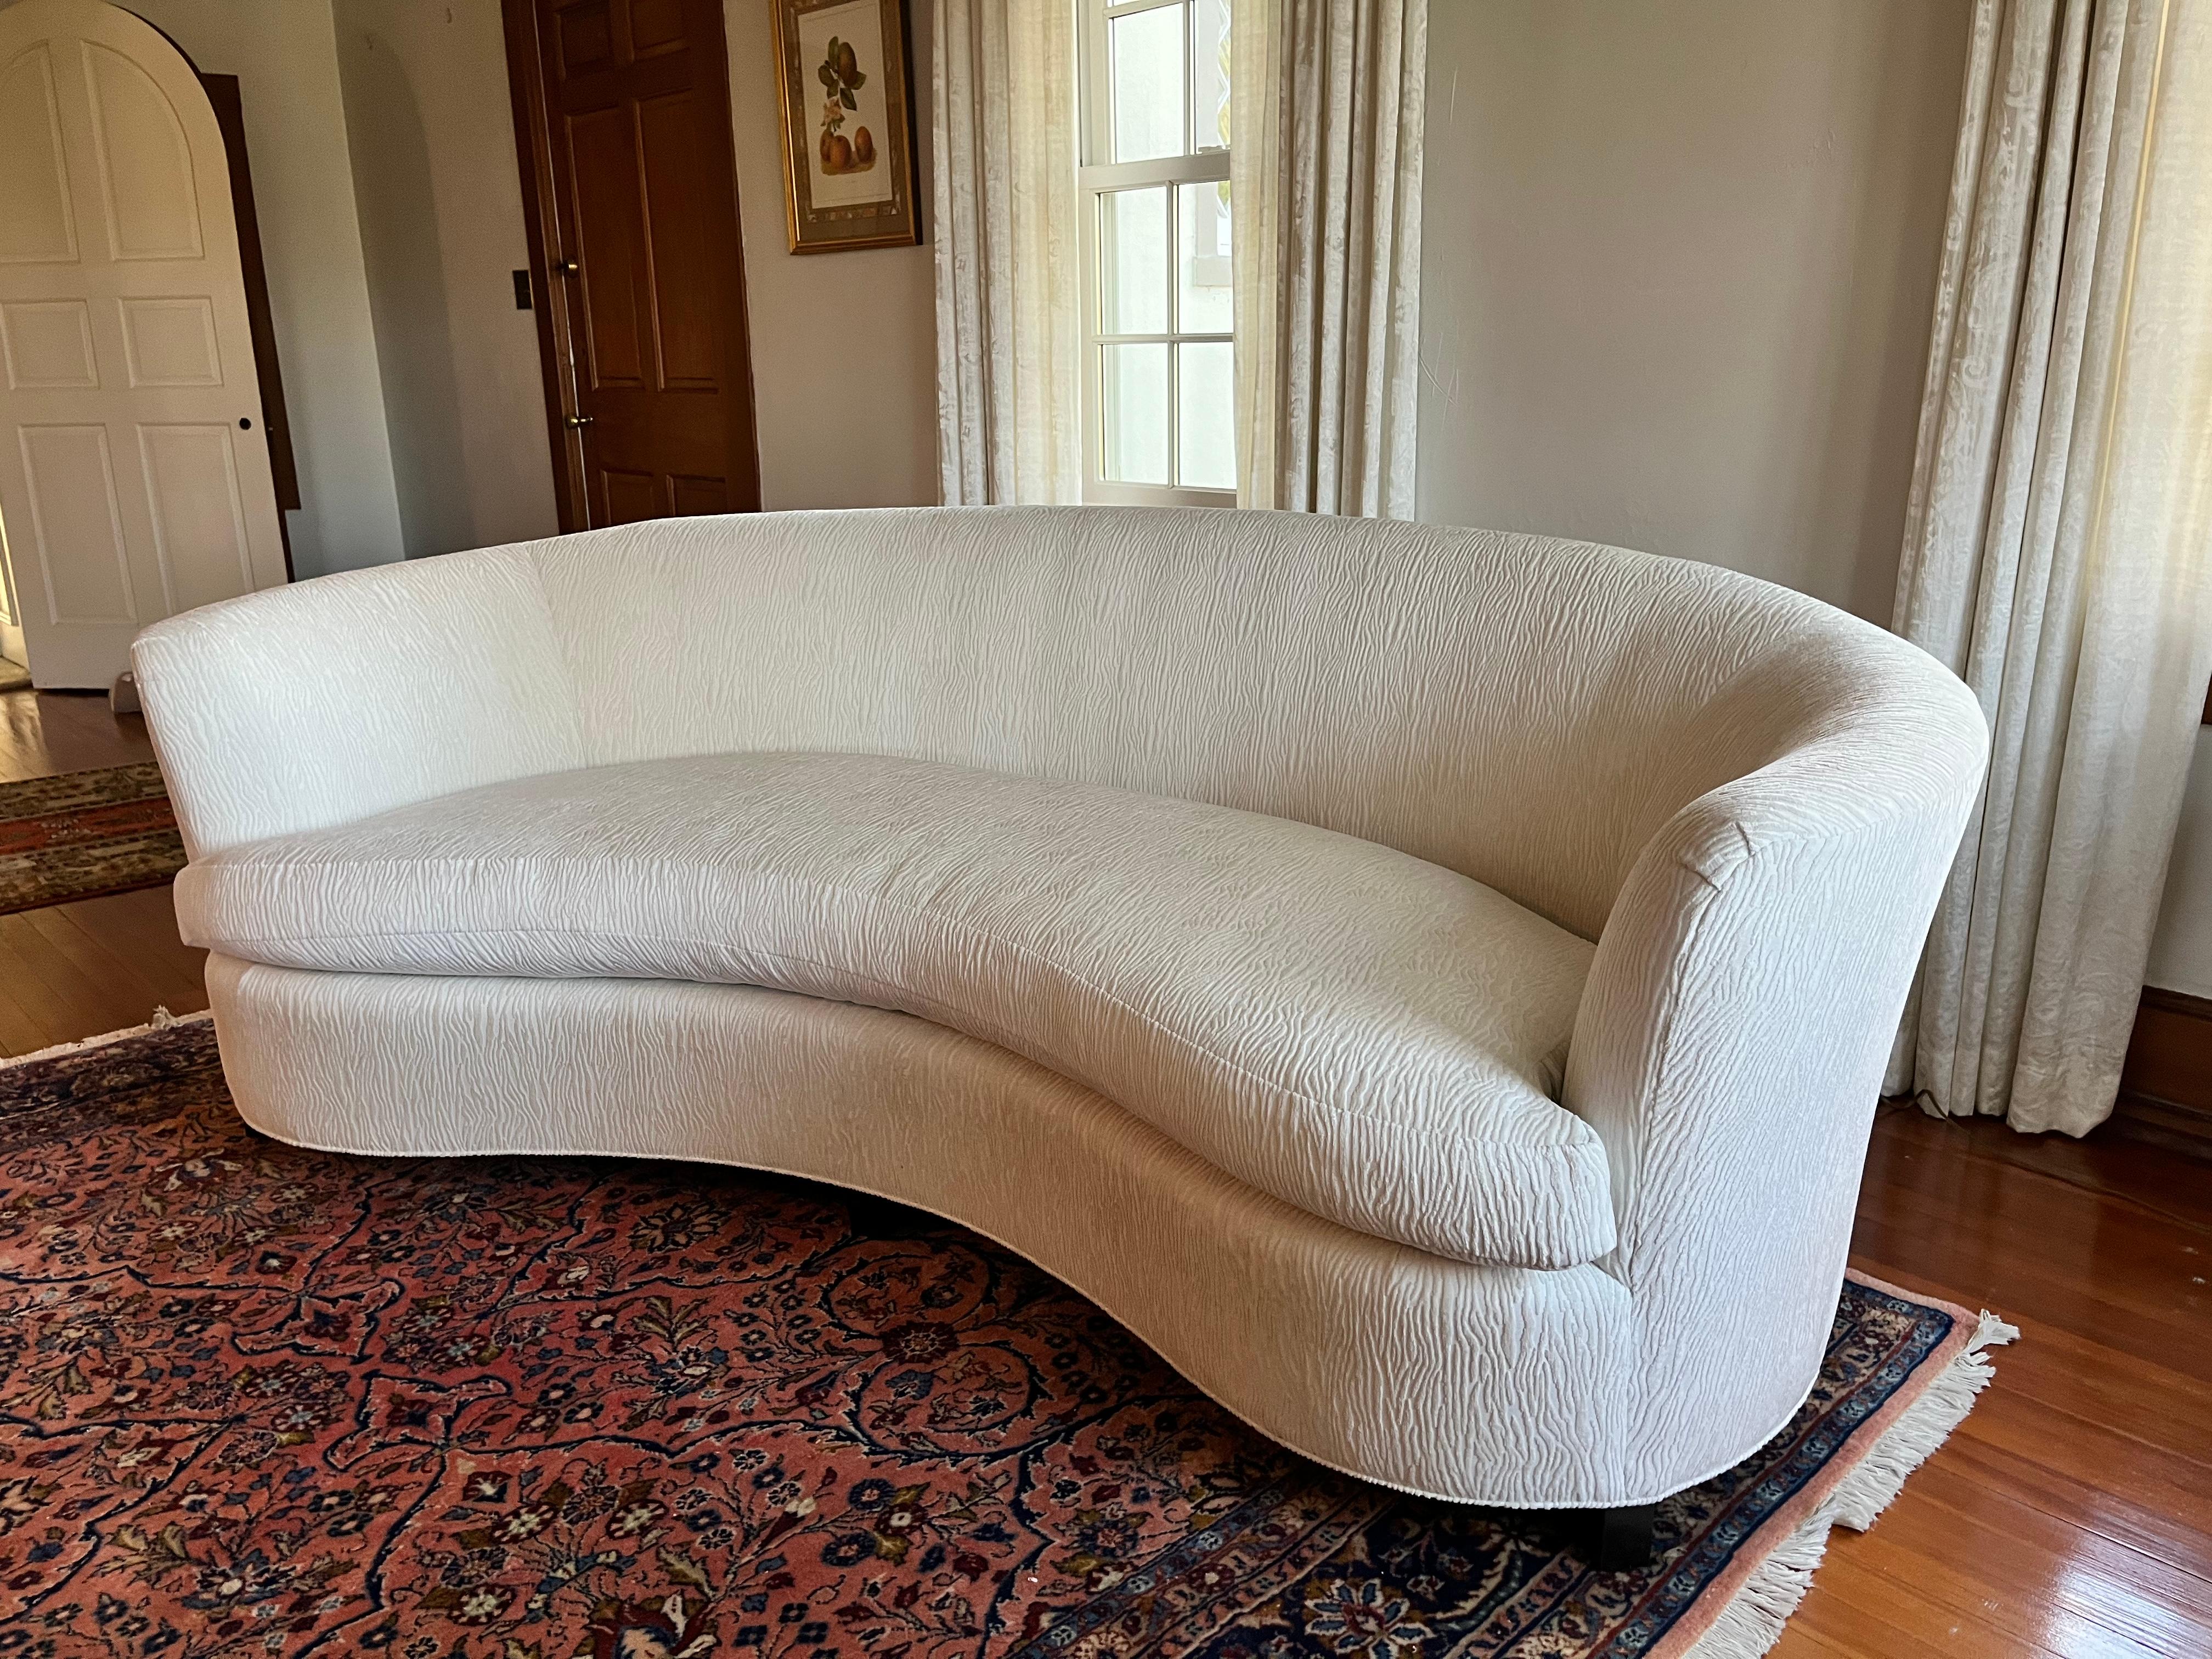 The Opera Sofa has a symmetrical design and a sense of simple refinement, like traditional opera house gallery seating. It features a tight back and a loose, comfortable bench cushion.  Recently reupholstered in a P. Kaufmann performance spectral